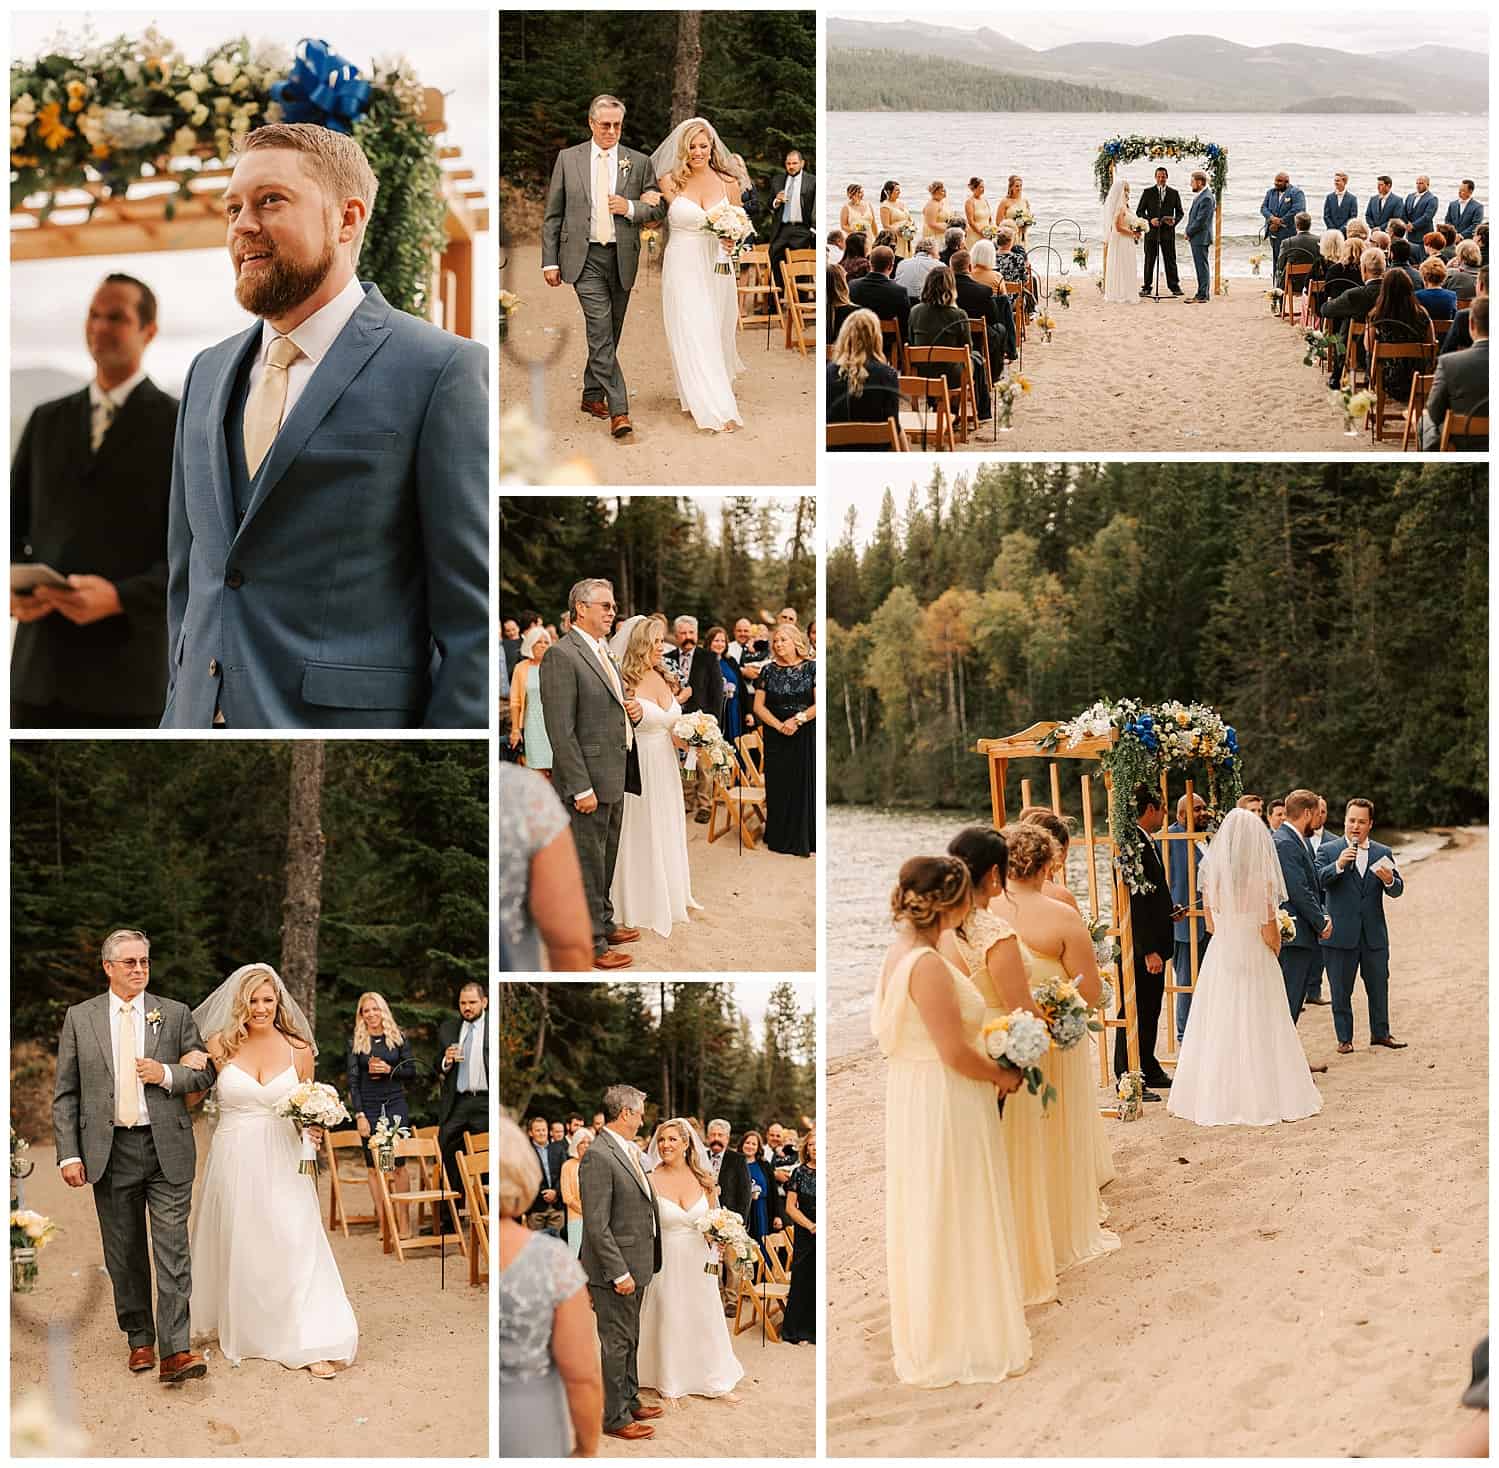 Waterfront ceremony for this Priest Lake wedding